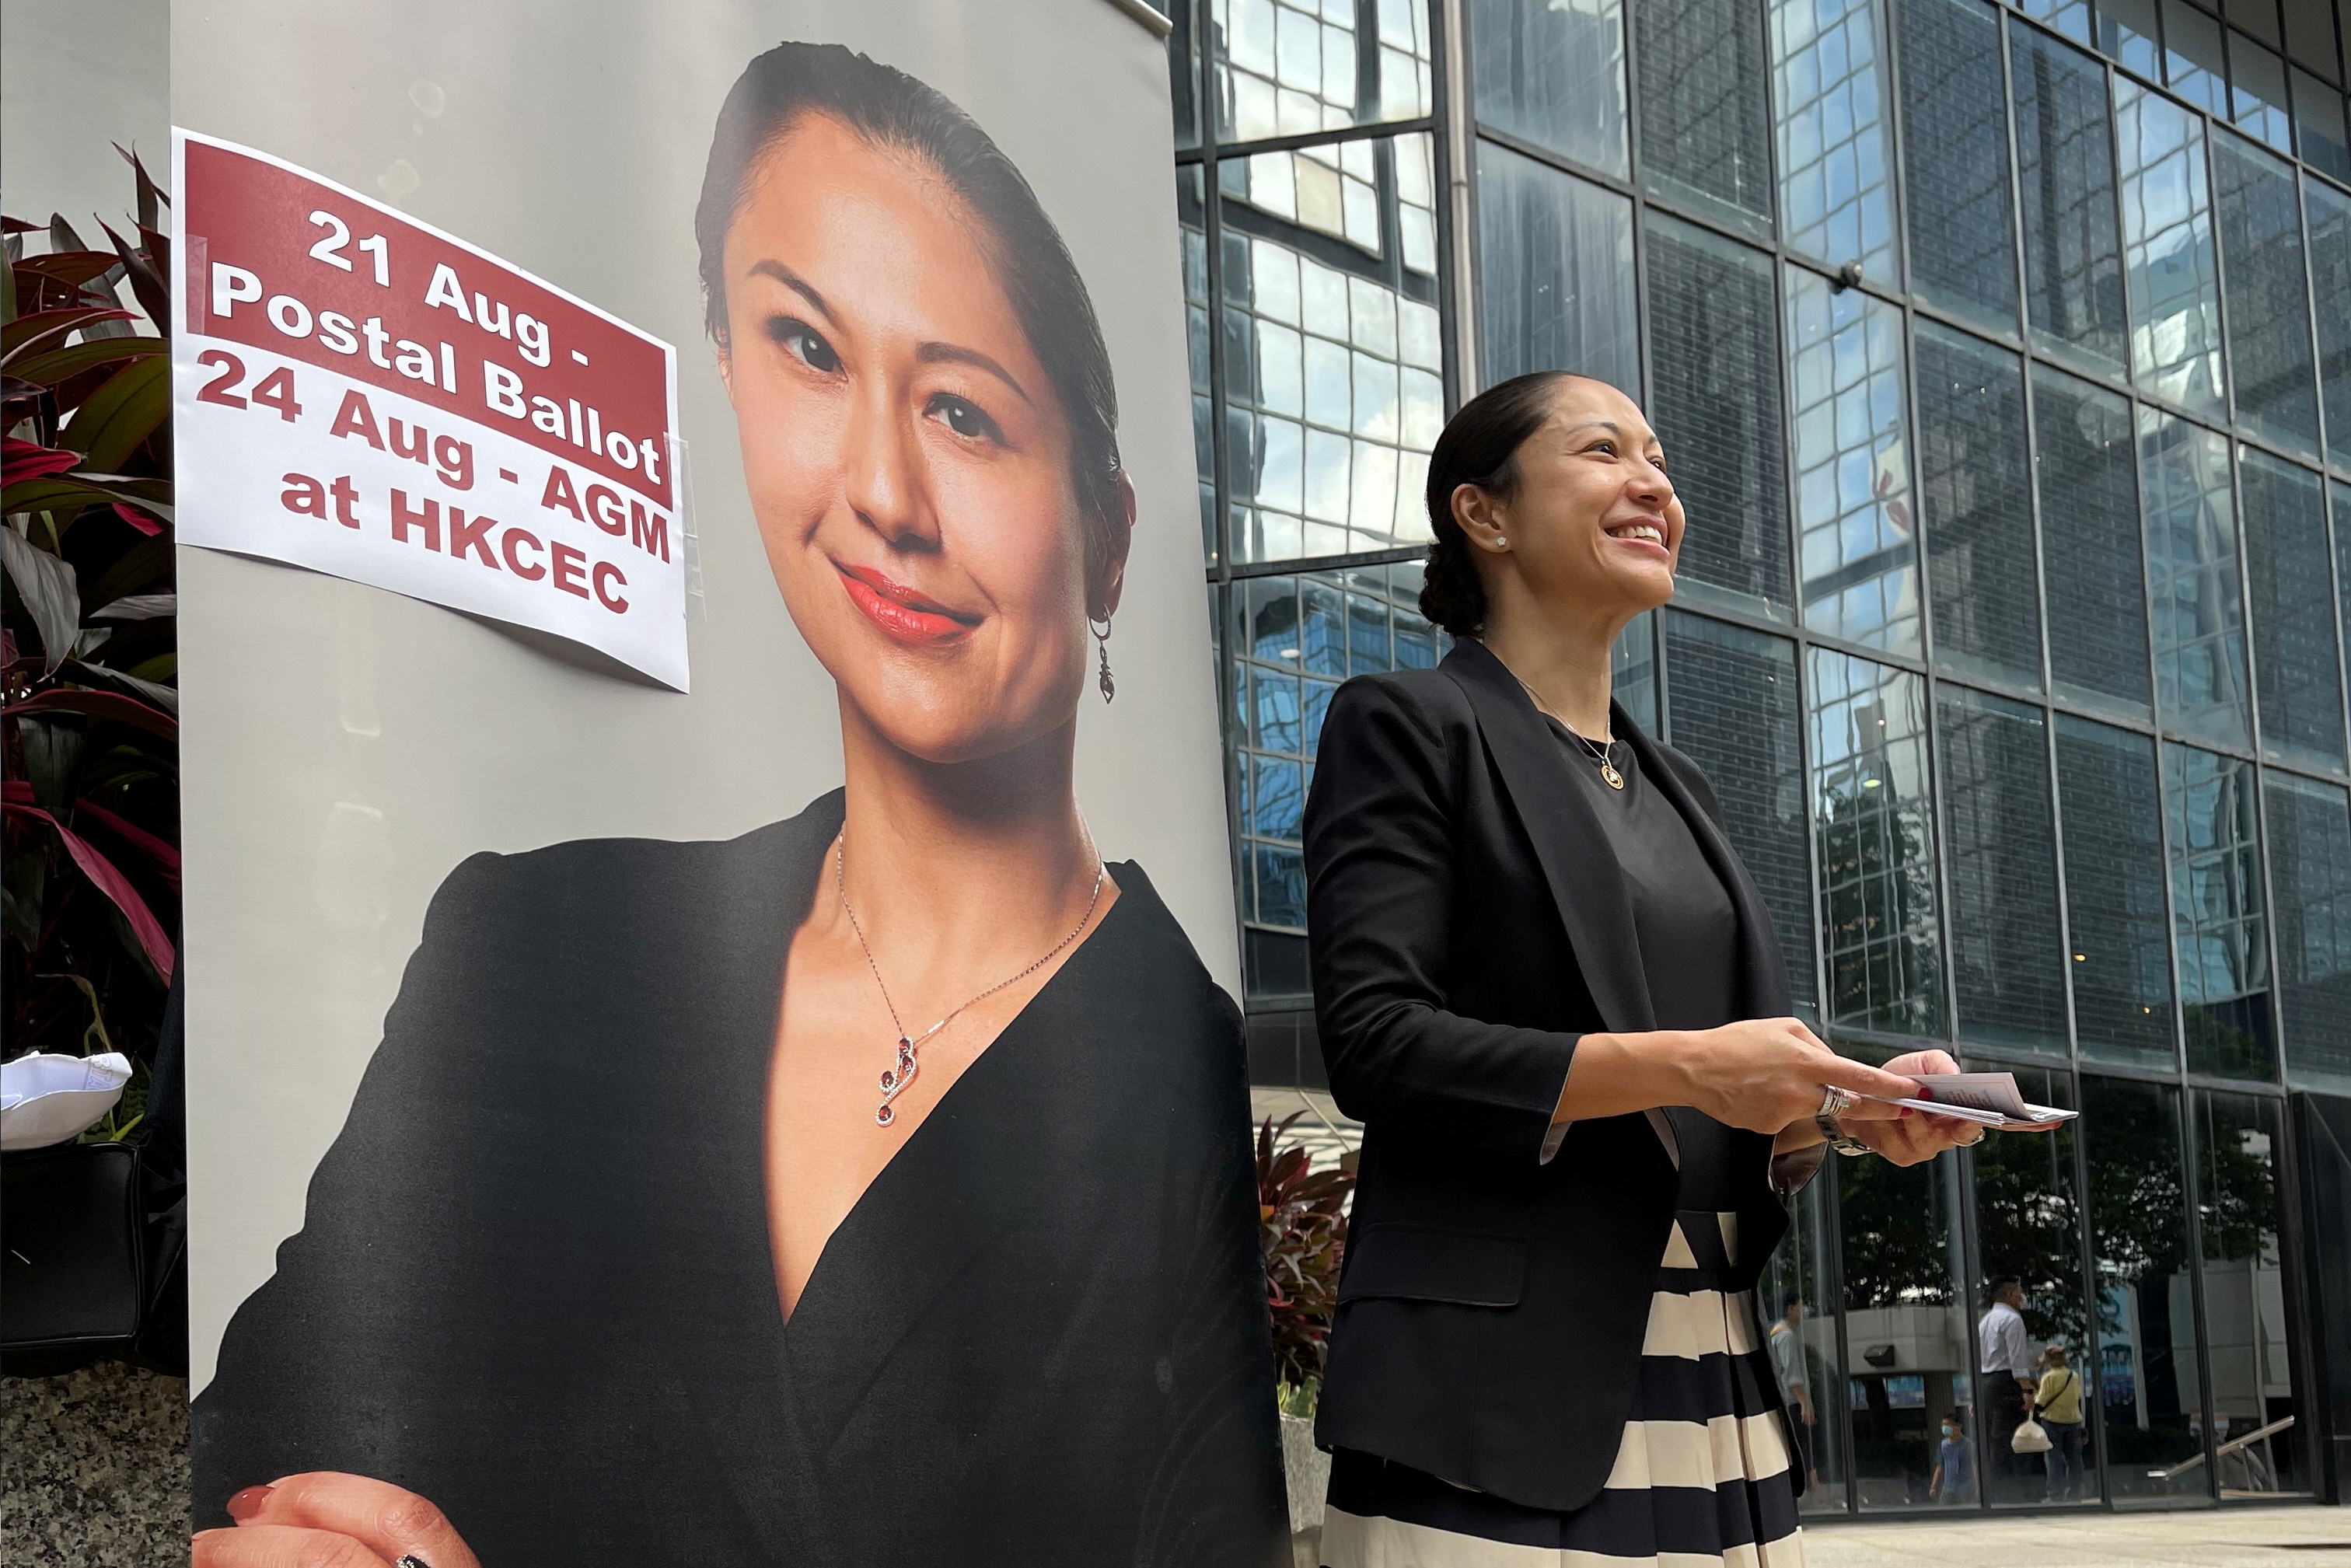 Selma Masood, a candidate for the Hong Kong Law Society's election to select new council members, hands out pamphlets outside the city's district court ahead of the election in Hong Kong, China August 12, 2021. REUTERS/James Pomfret